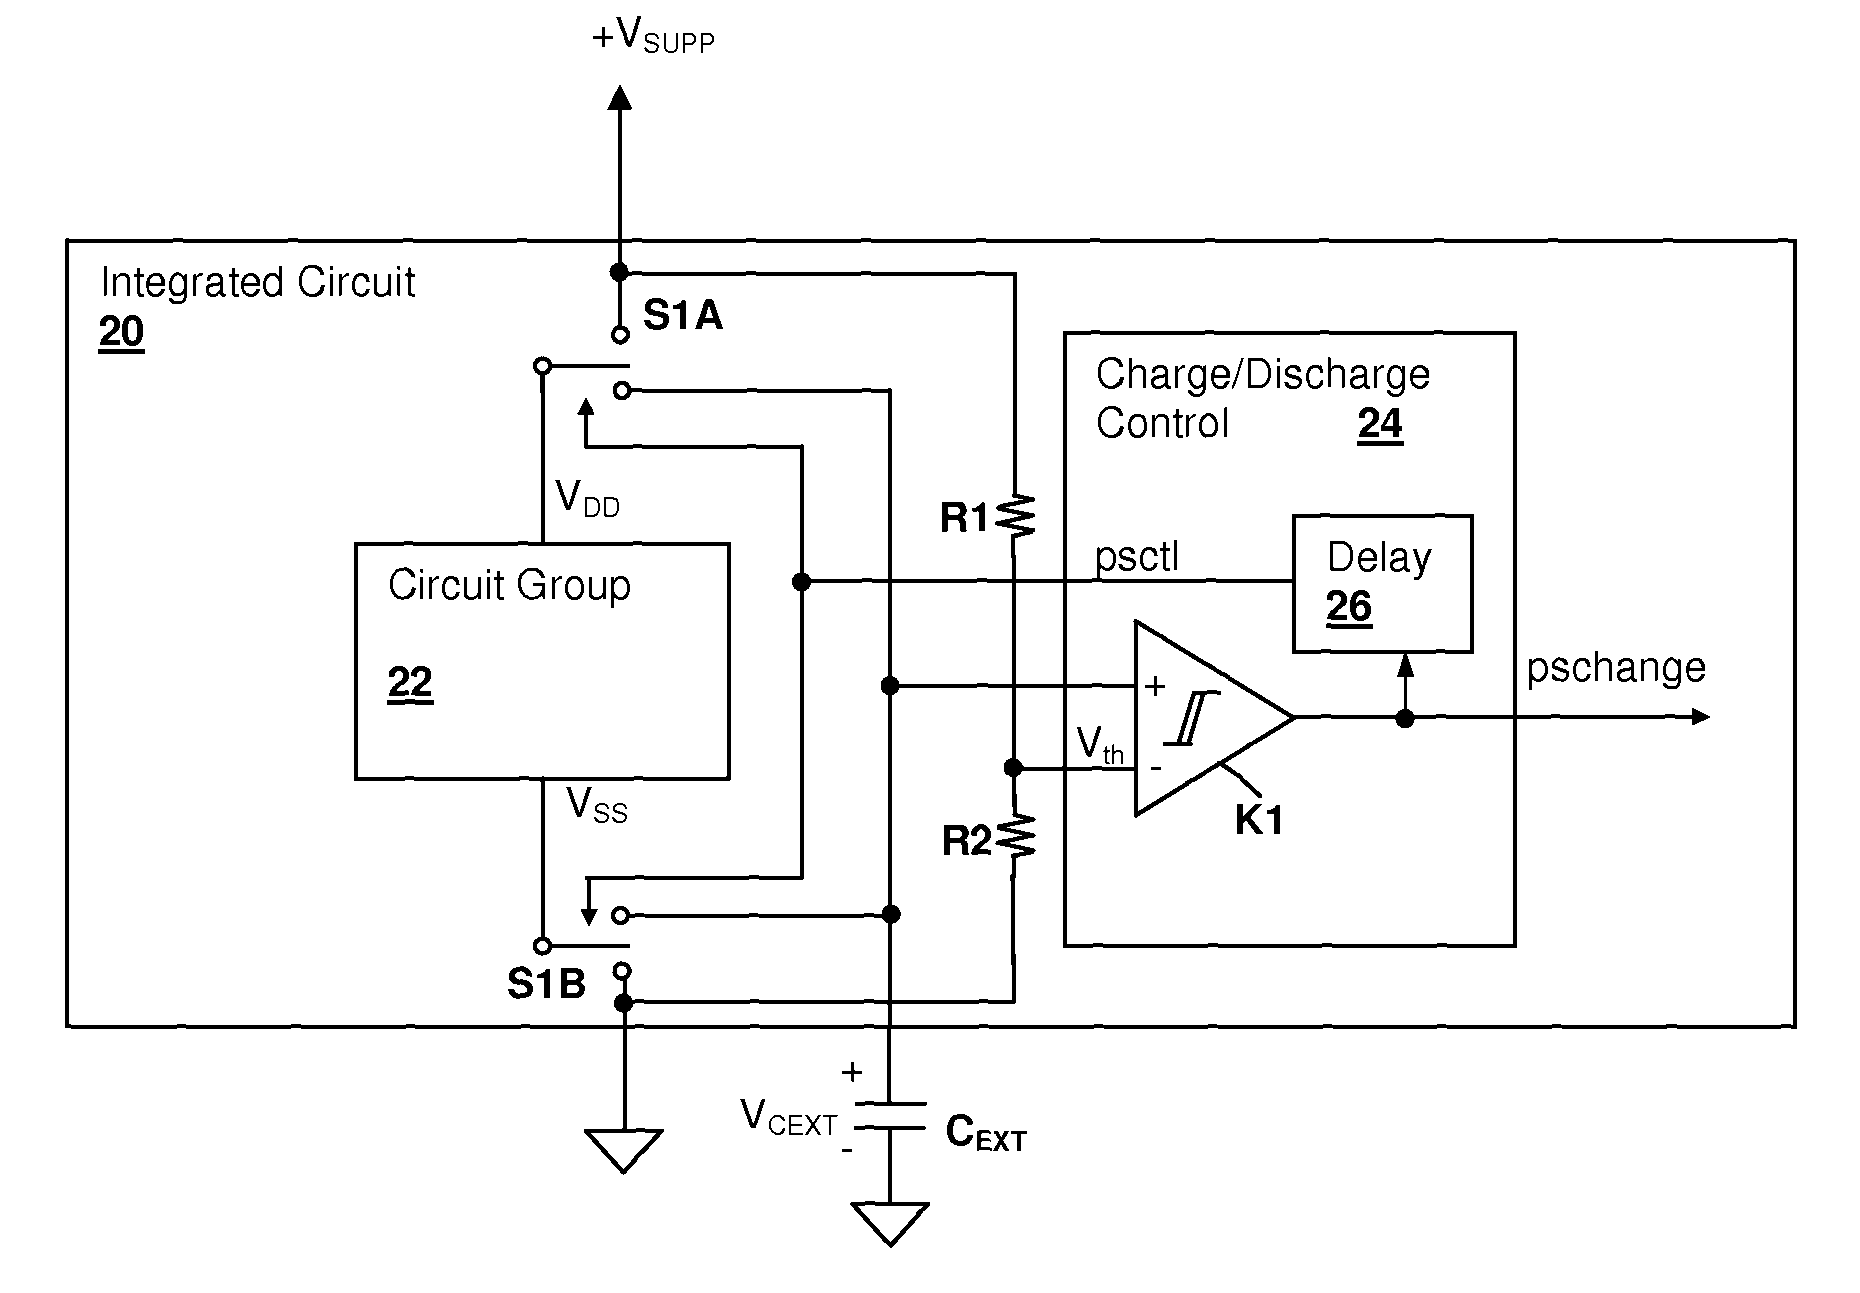 Powering a circuit by alternating power supply connections in series and parallel with a storage capacitor